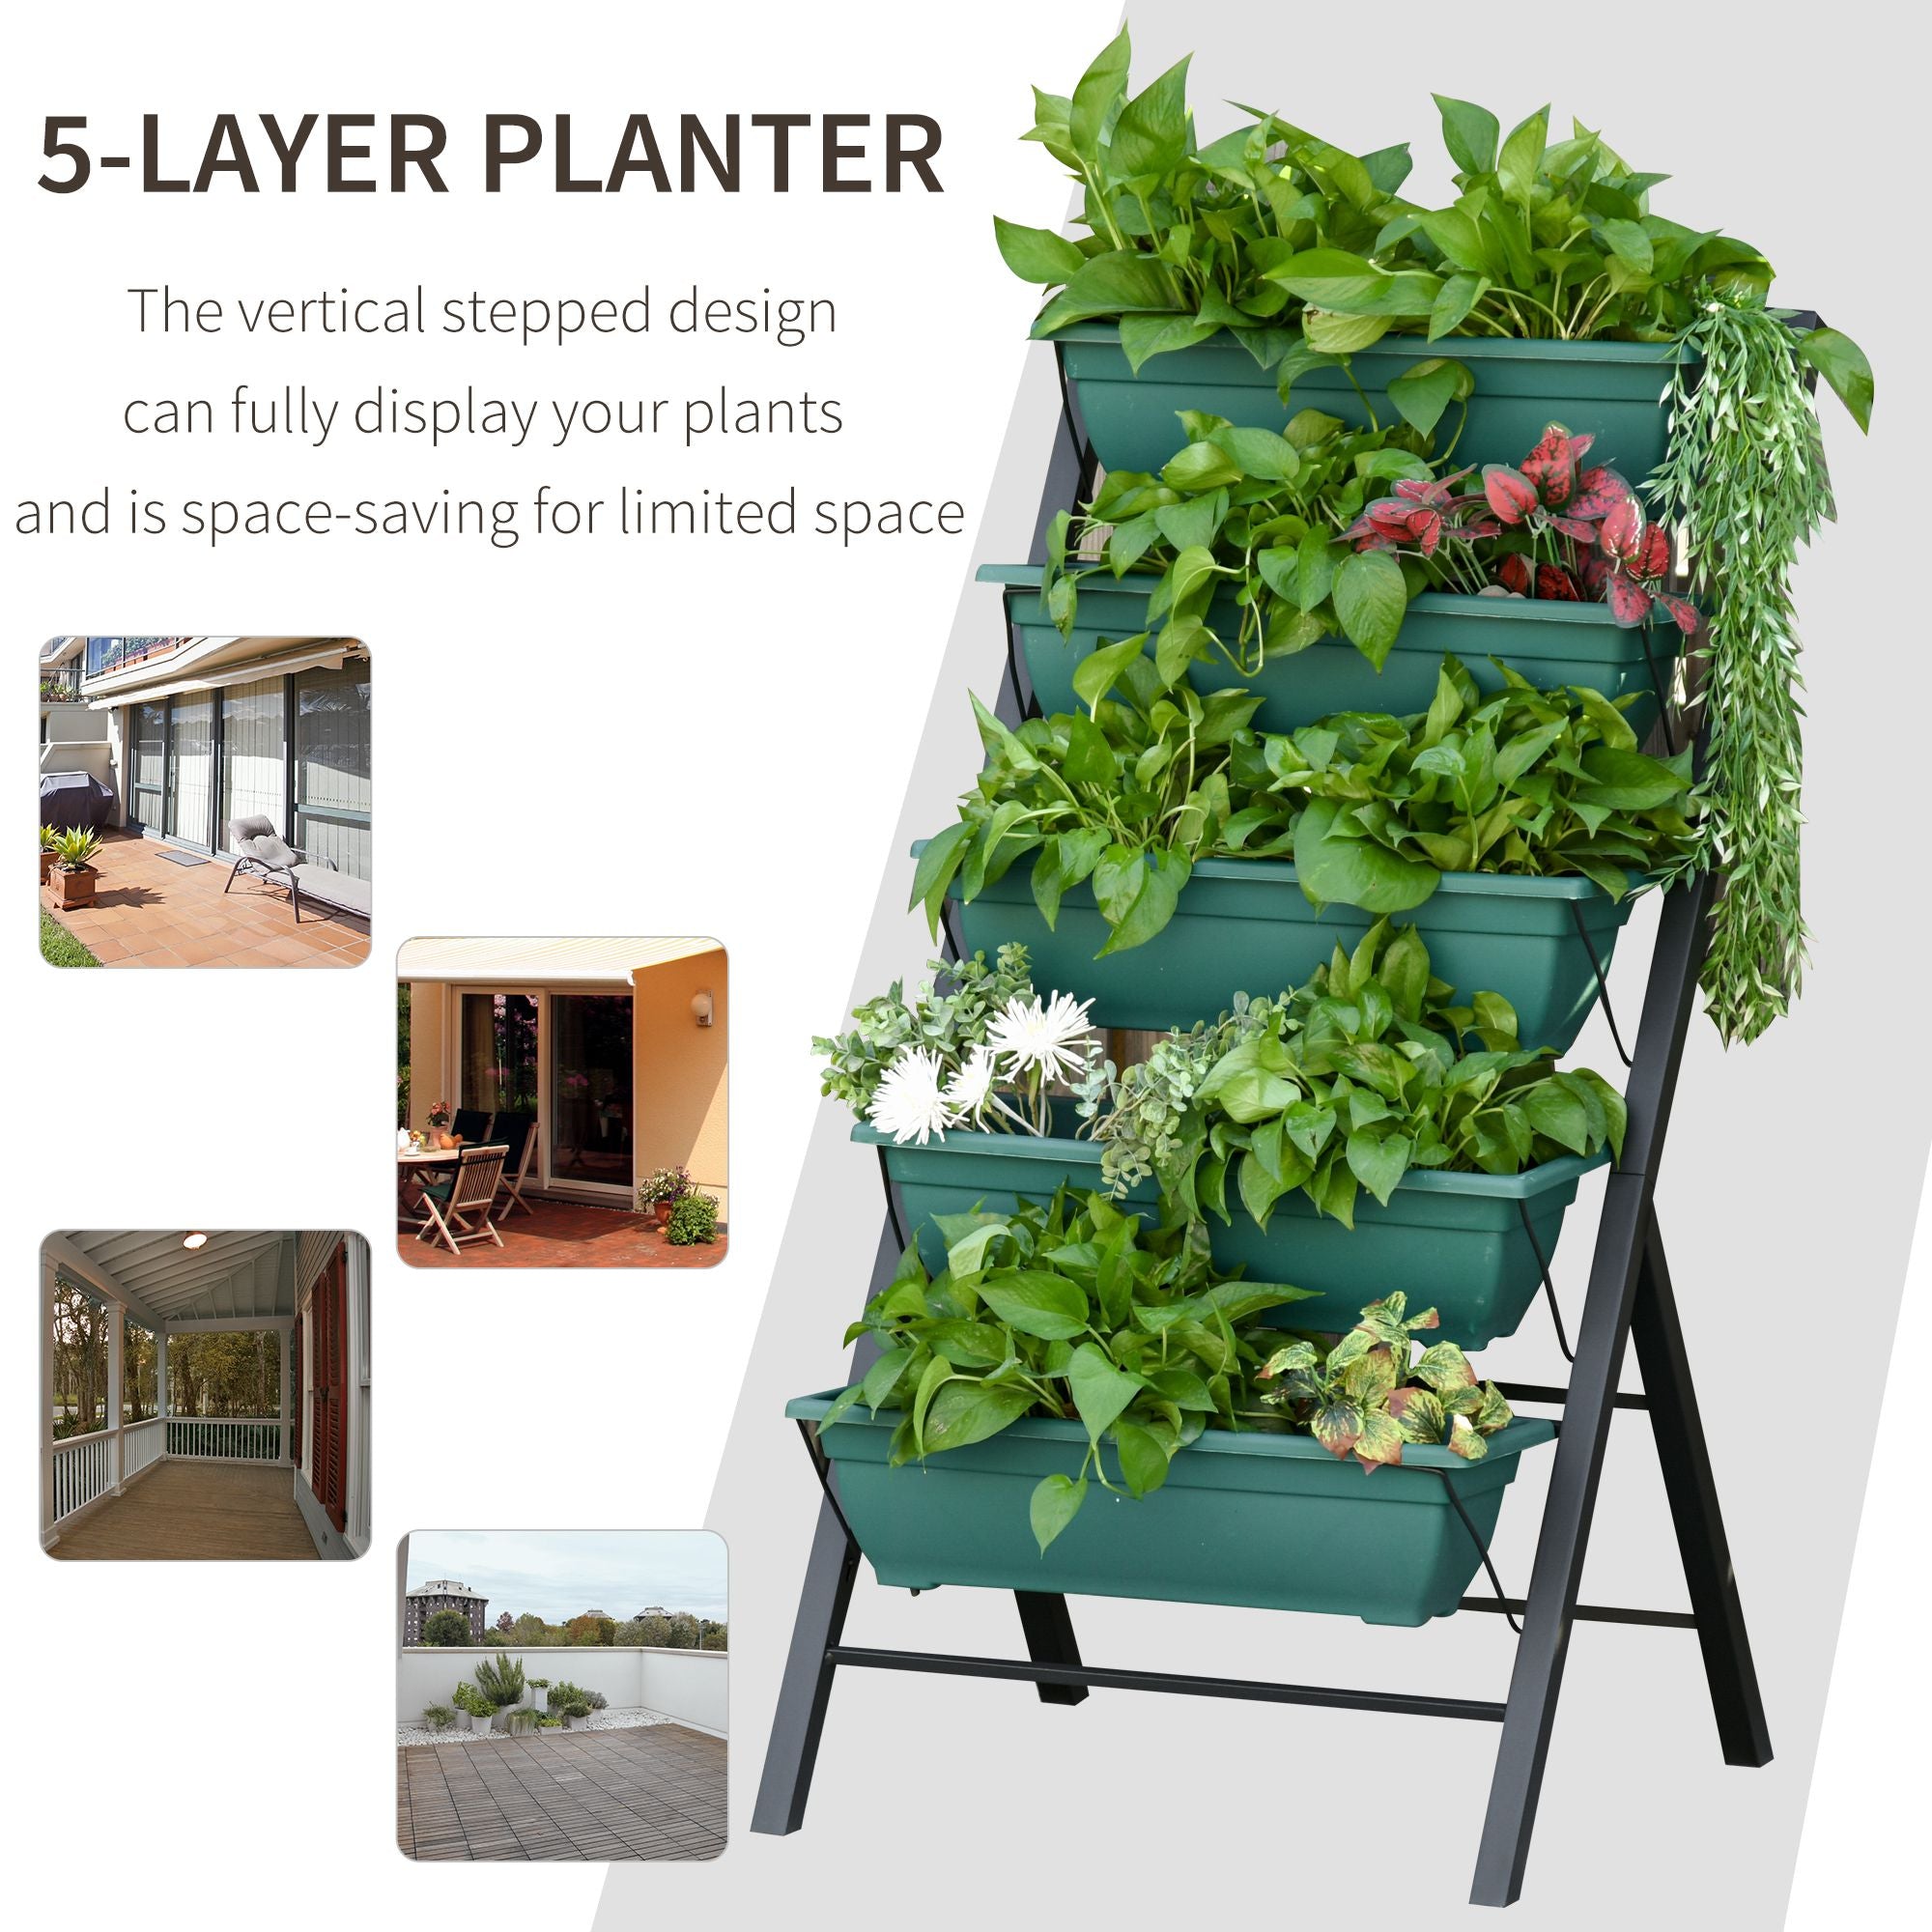 5-Tier Raised Garden Bed with Foldable Frame Planter Grow Containers Plant Flower Vegetable Pot with Leaking Holes for Outdoor Patio